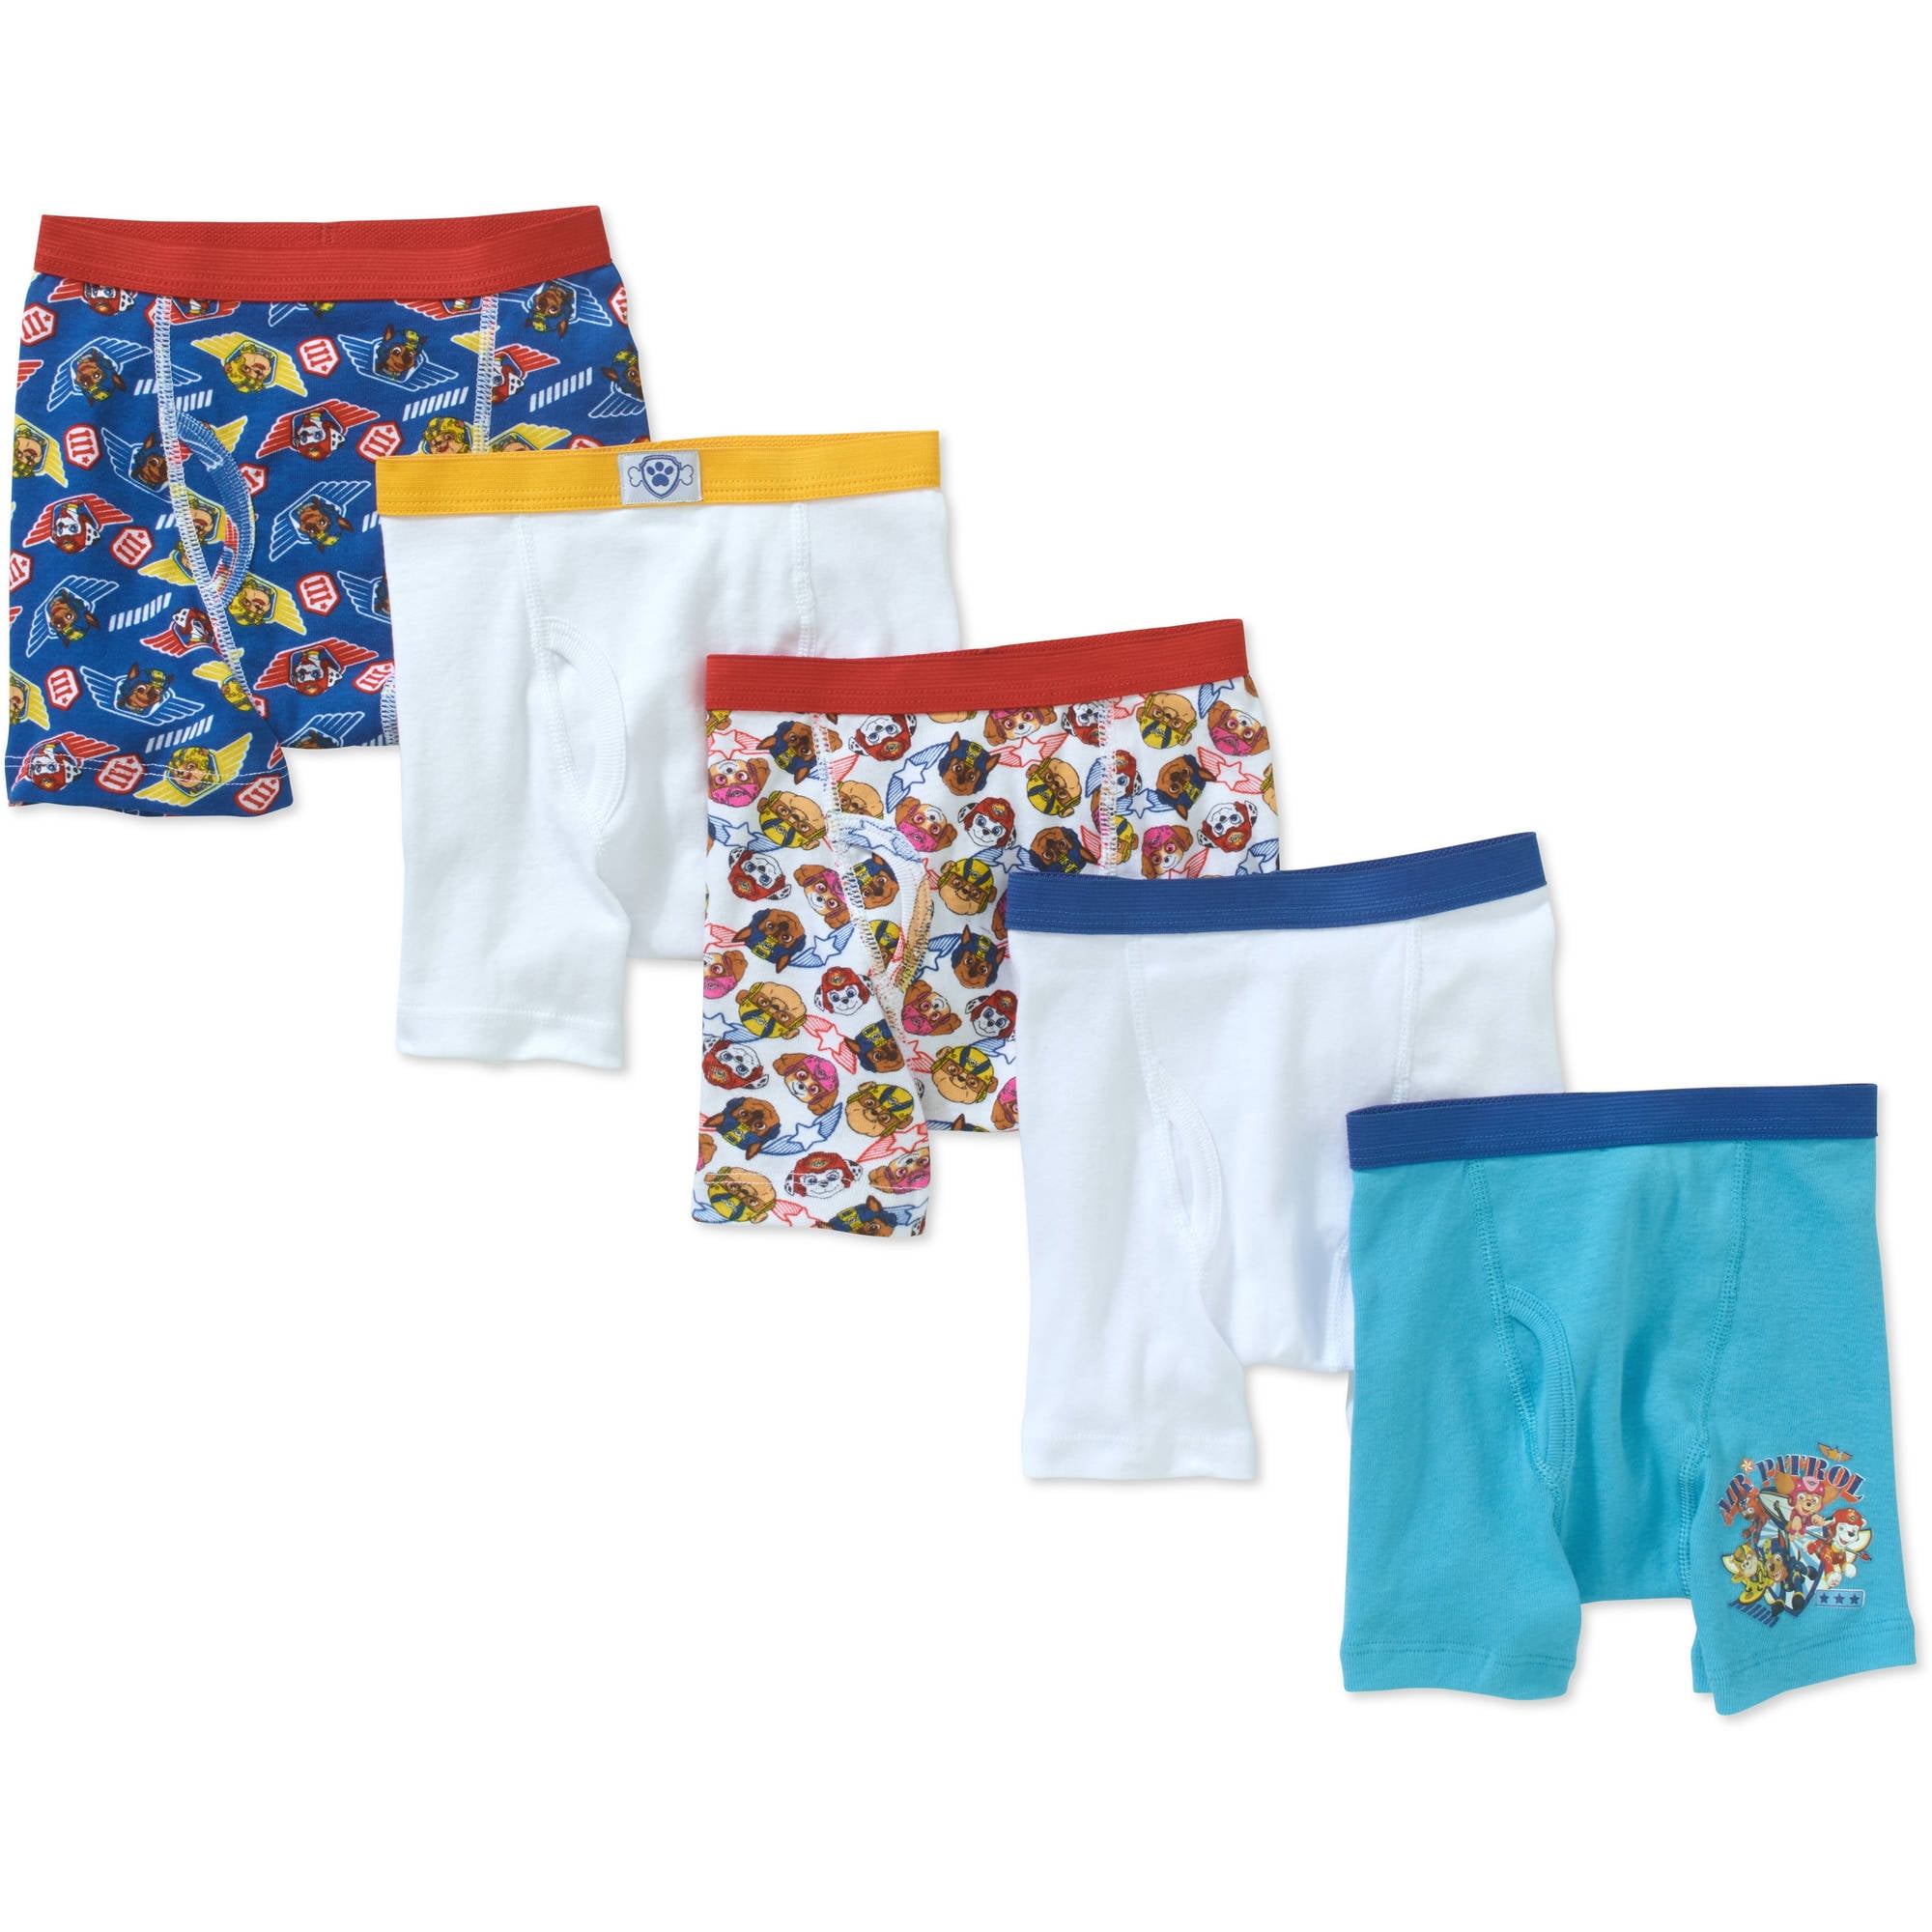 Boys Paw Patrol ' Catch The Waves ' Swimming Trunks Boxers